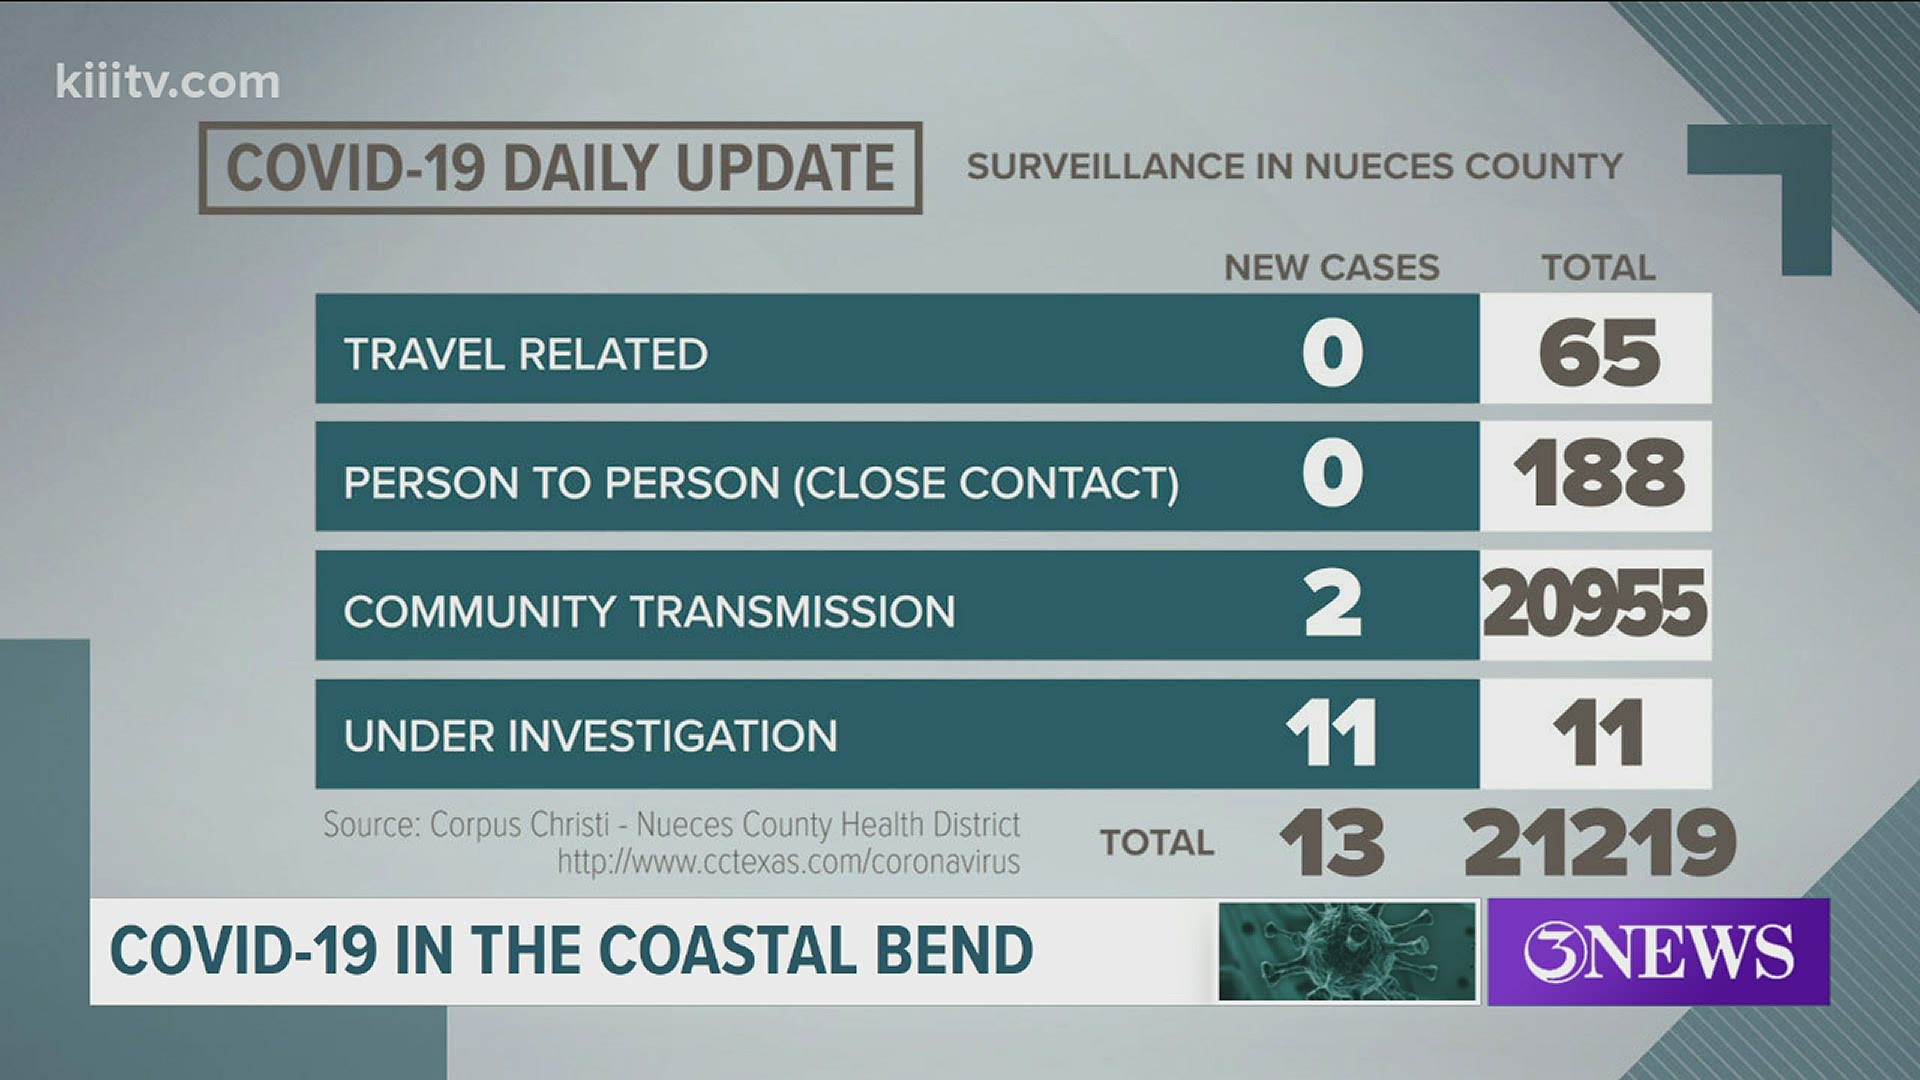 There were no COVID-19 related deaths reported today. Of the 13 new cases reported in Nueces County 2 are from the state's data dump.